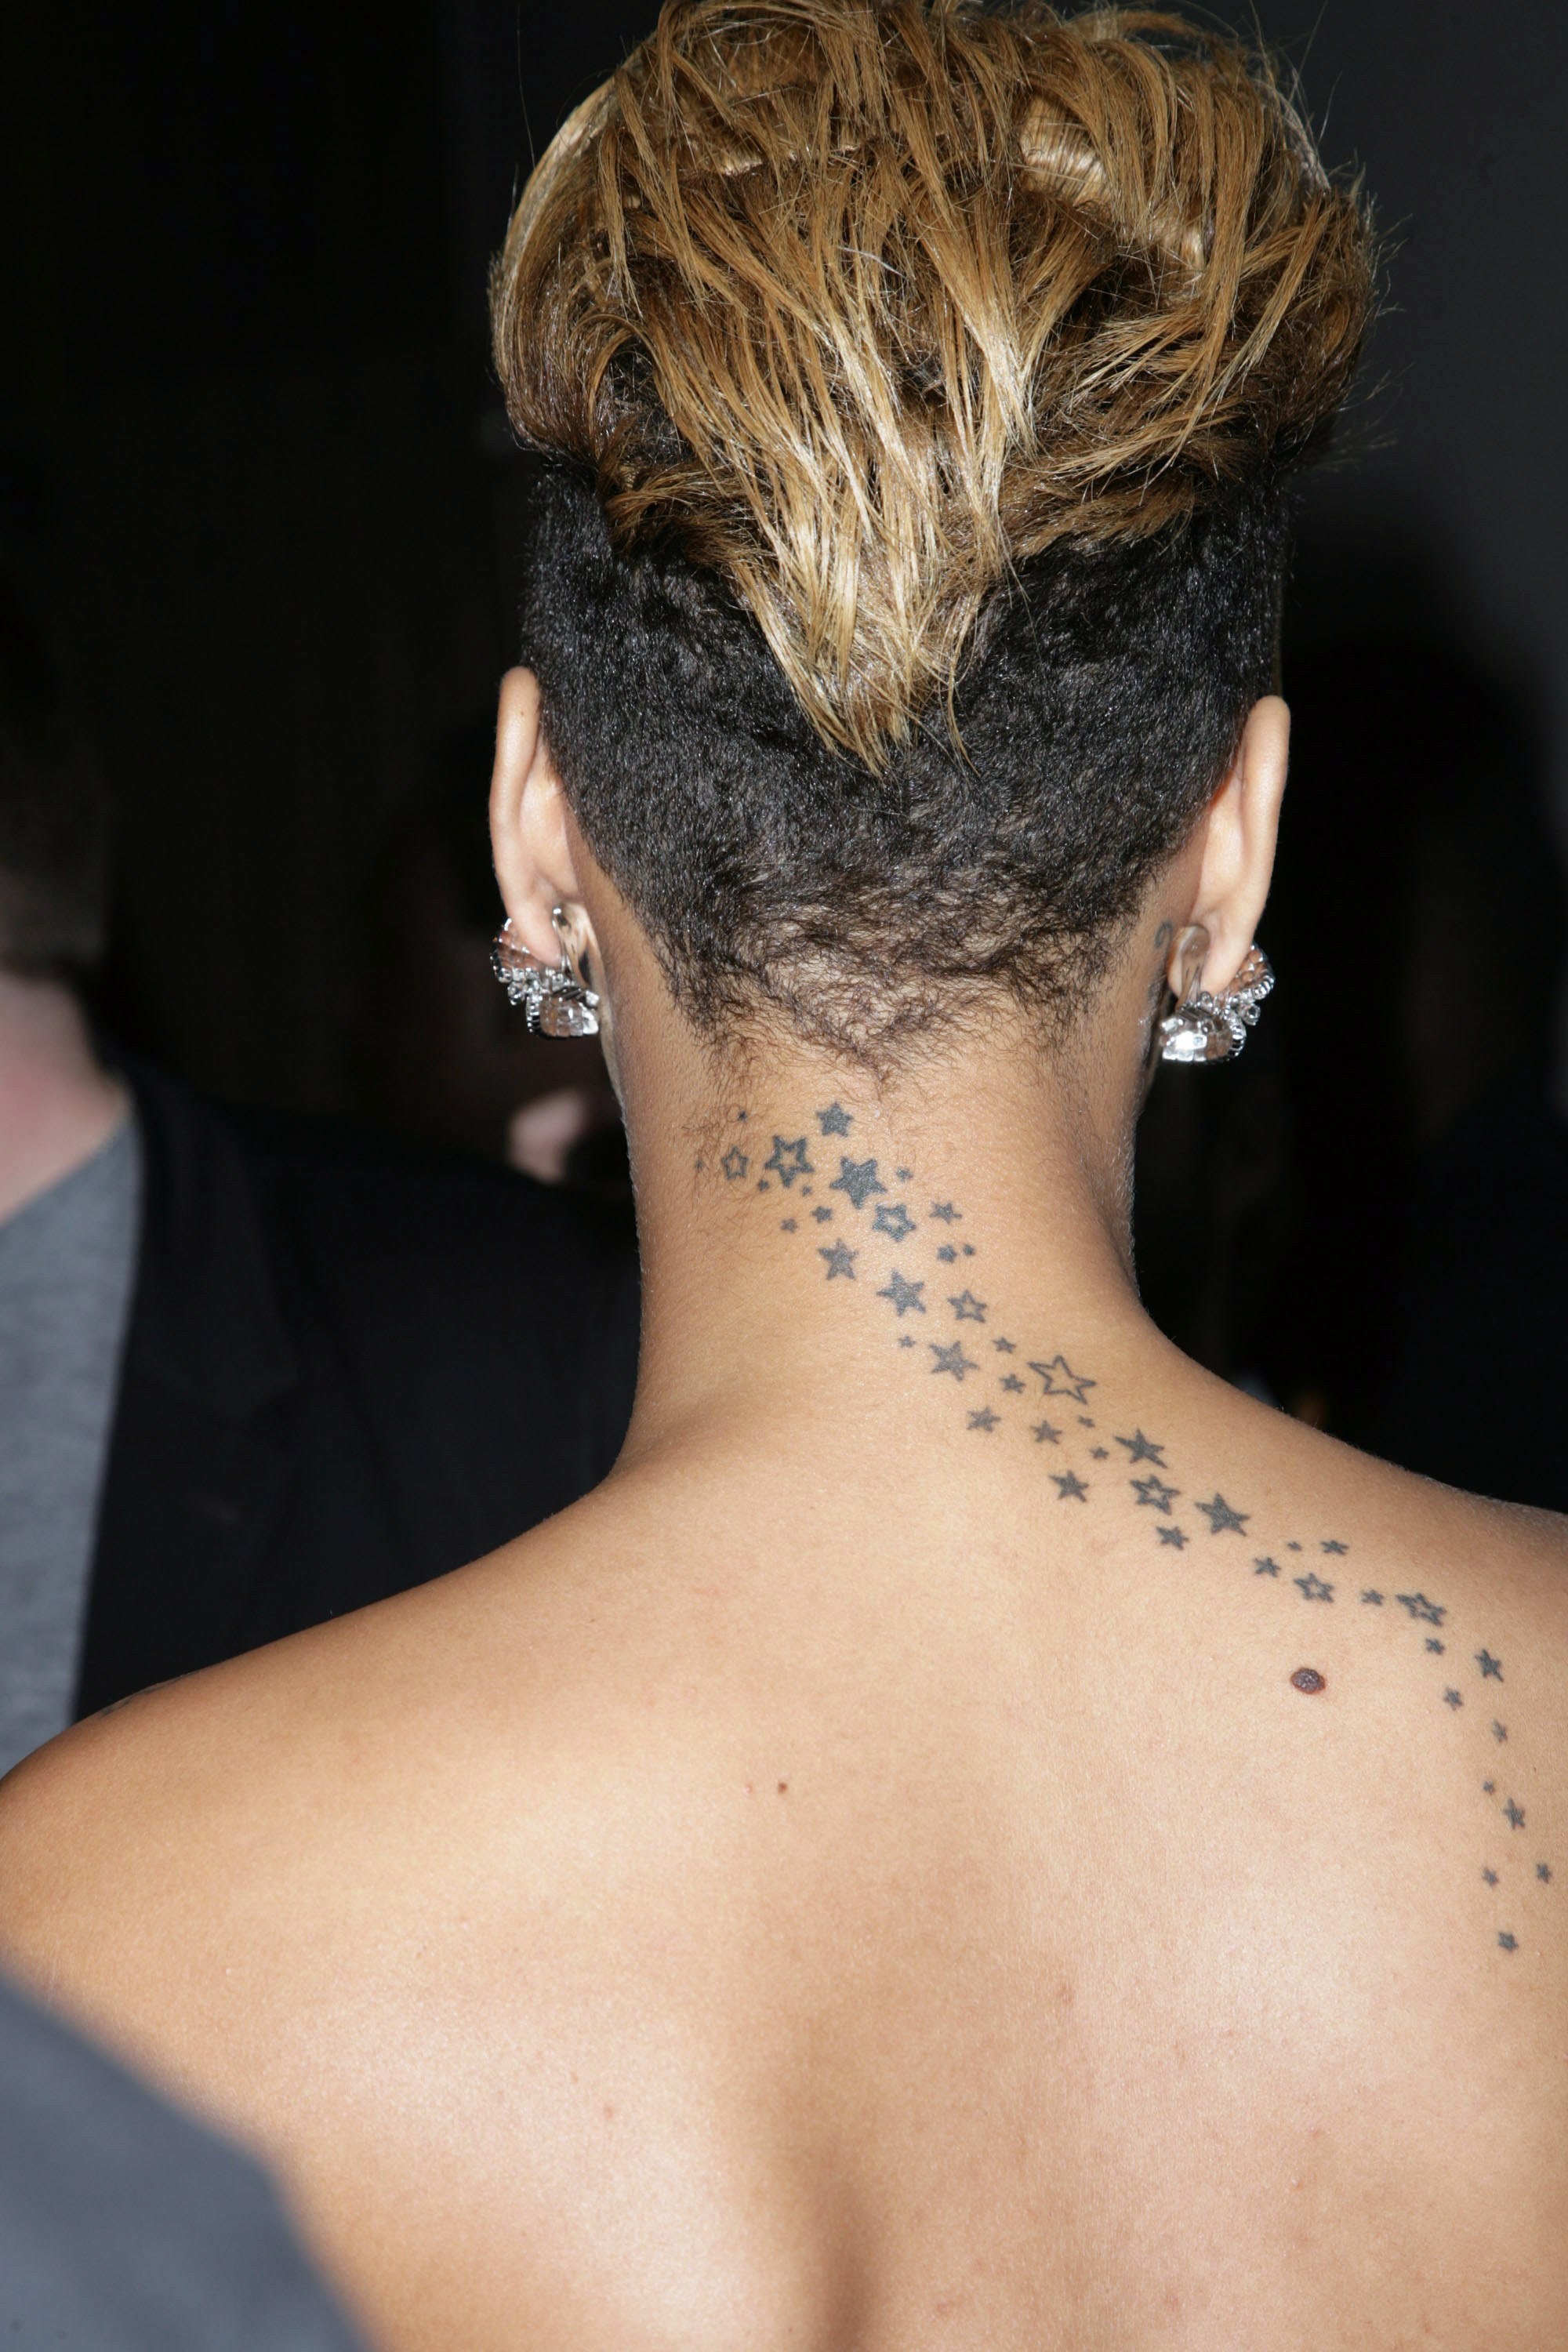 Rihanna's Shark Tattoo May Have Special Drake Meaning | The FADER